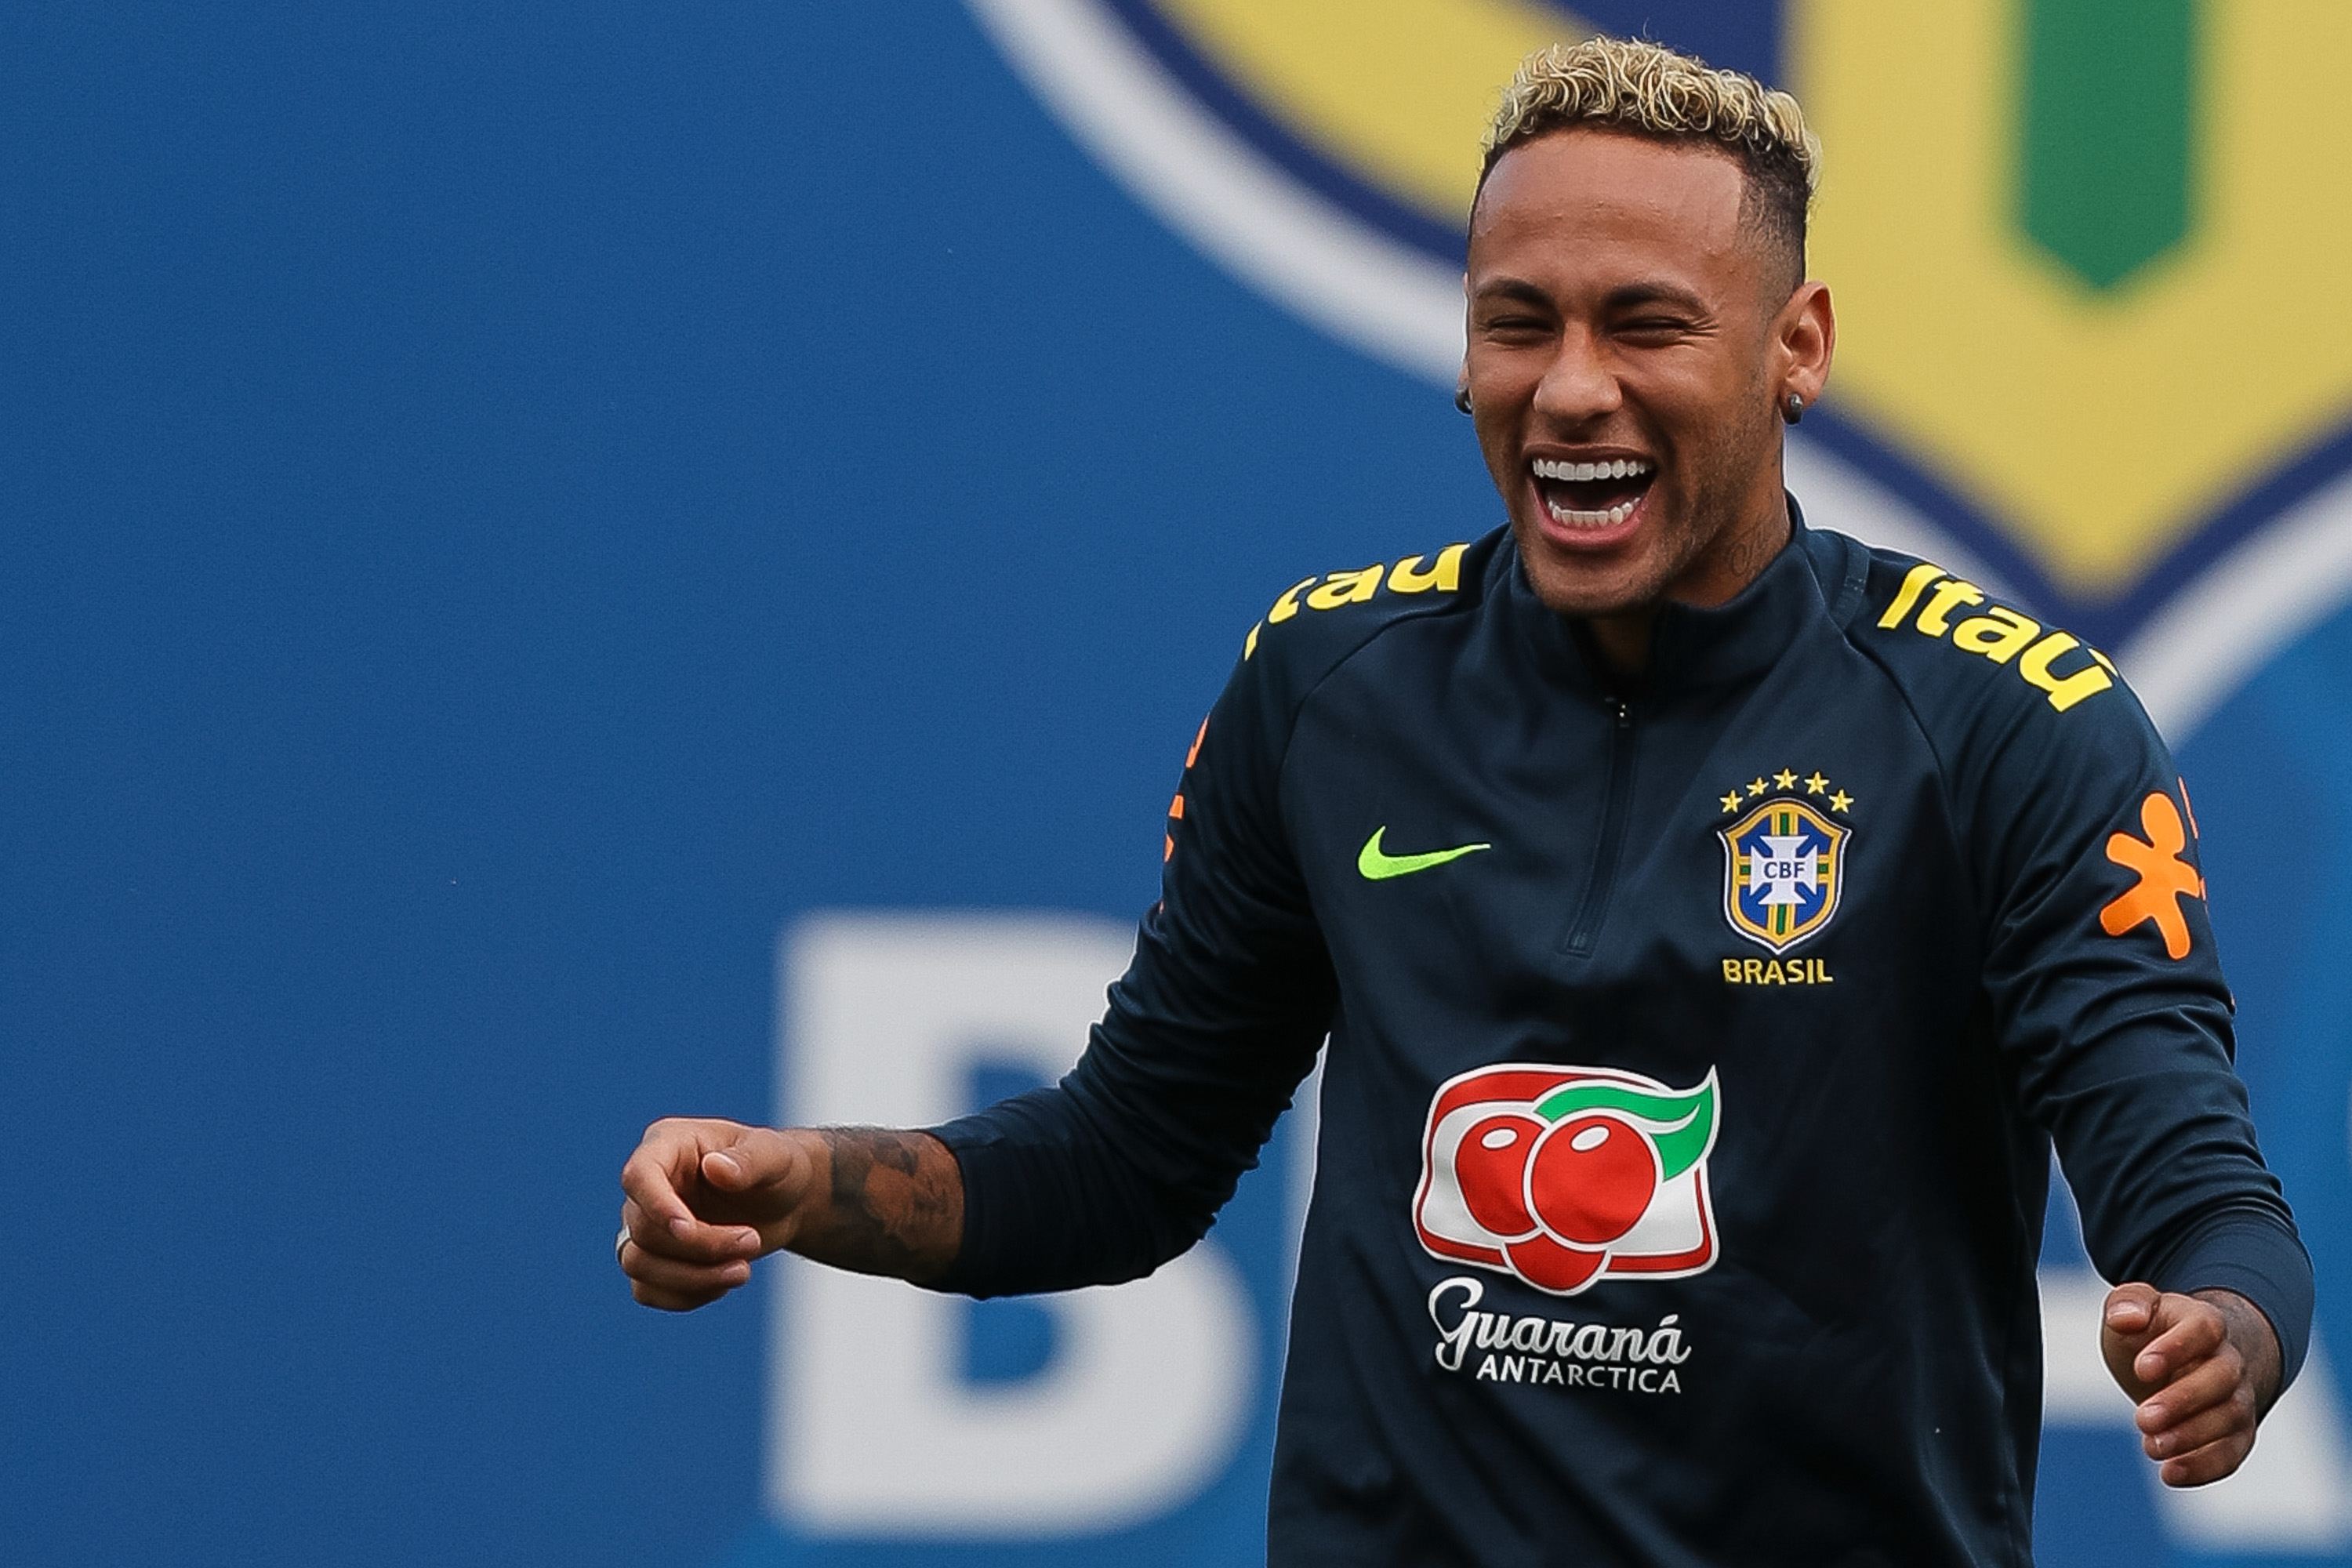 Neymar’s Flopping At World Cup: KFC Commercial Gets In On The Joke